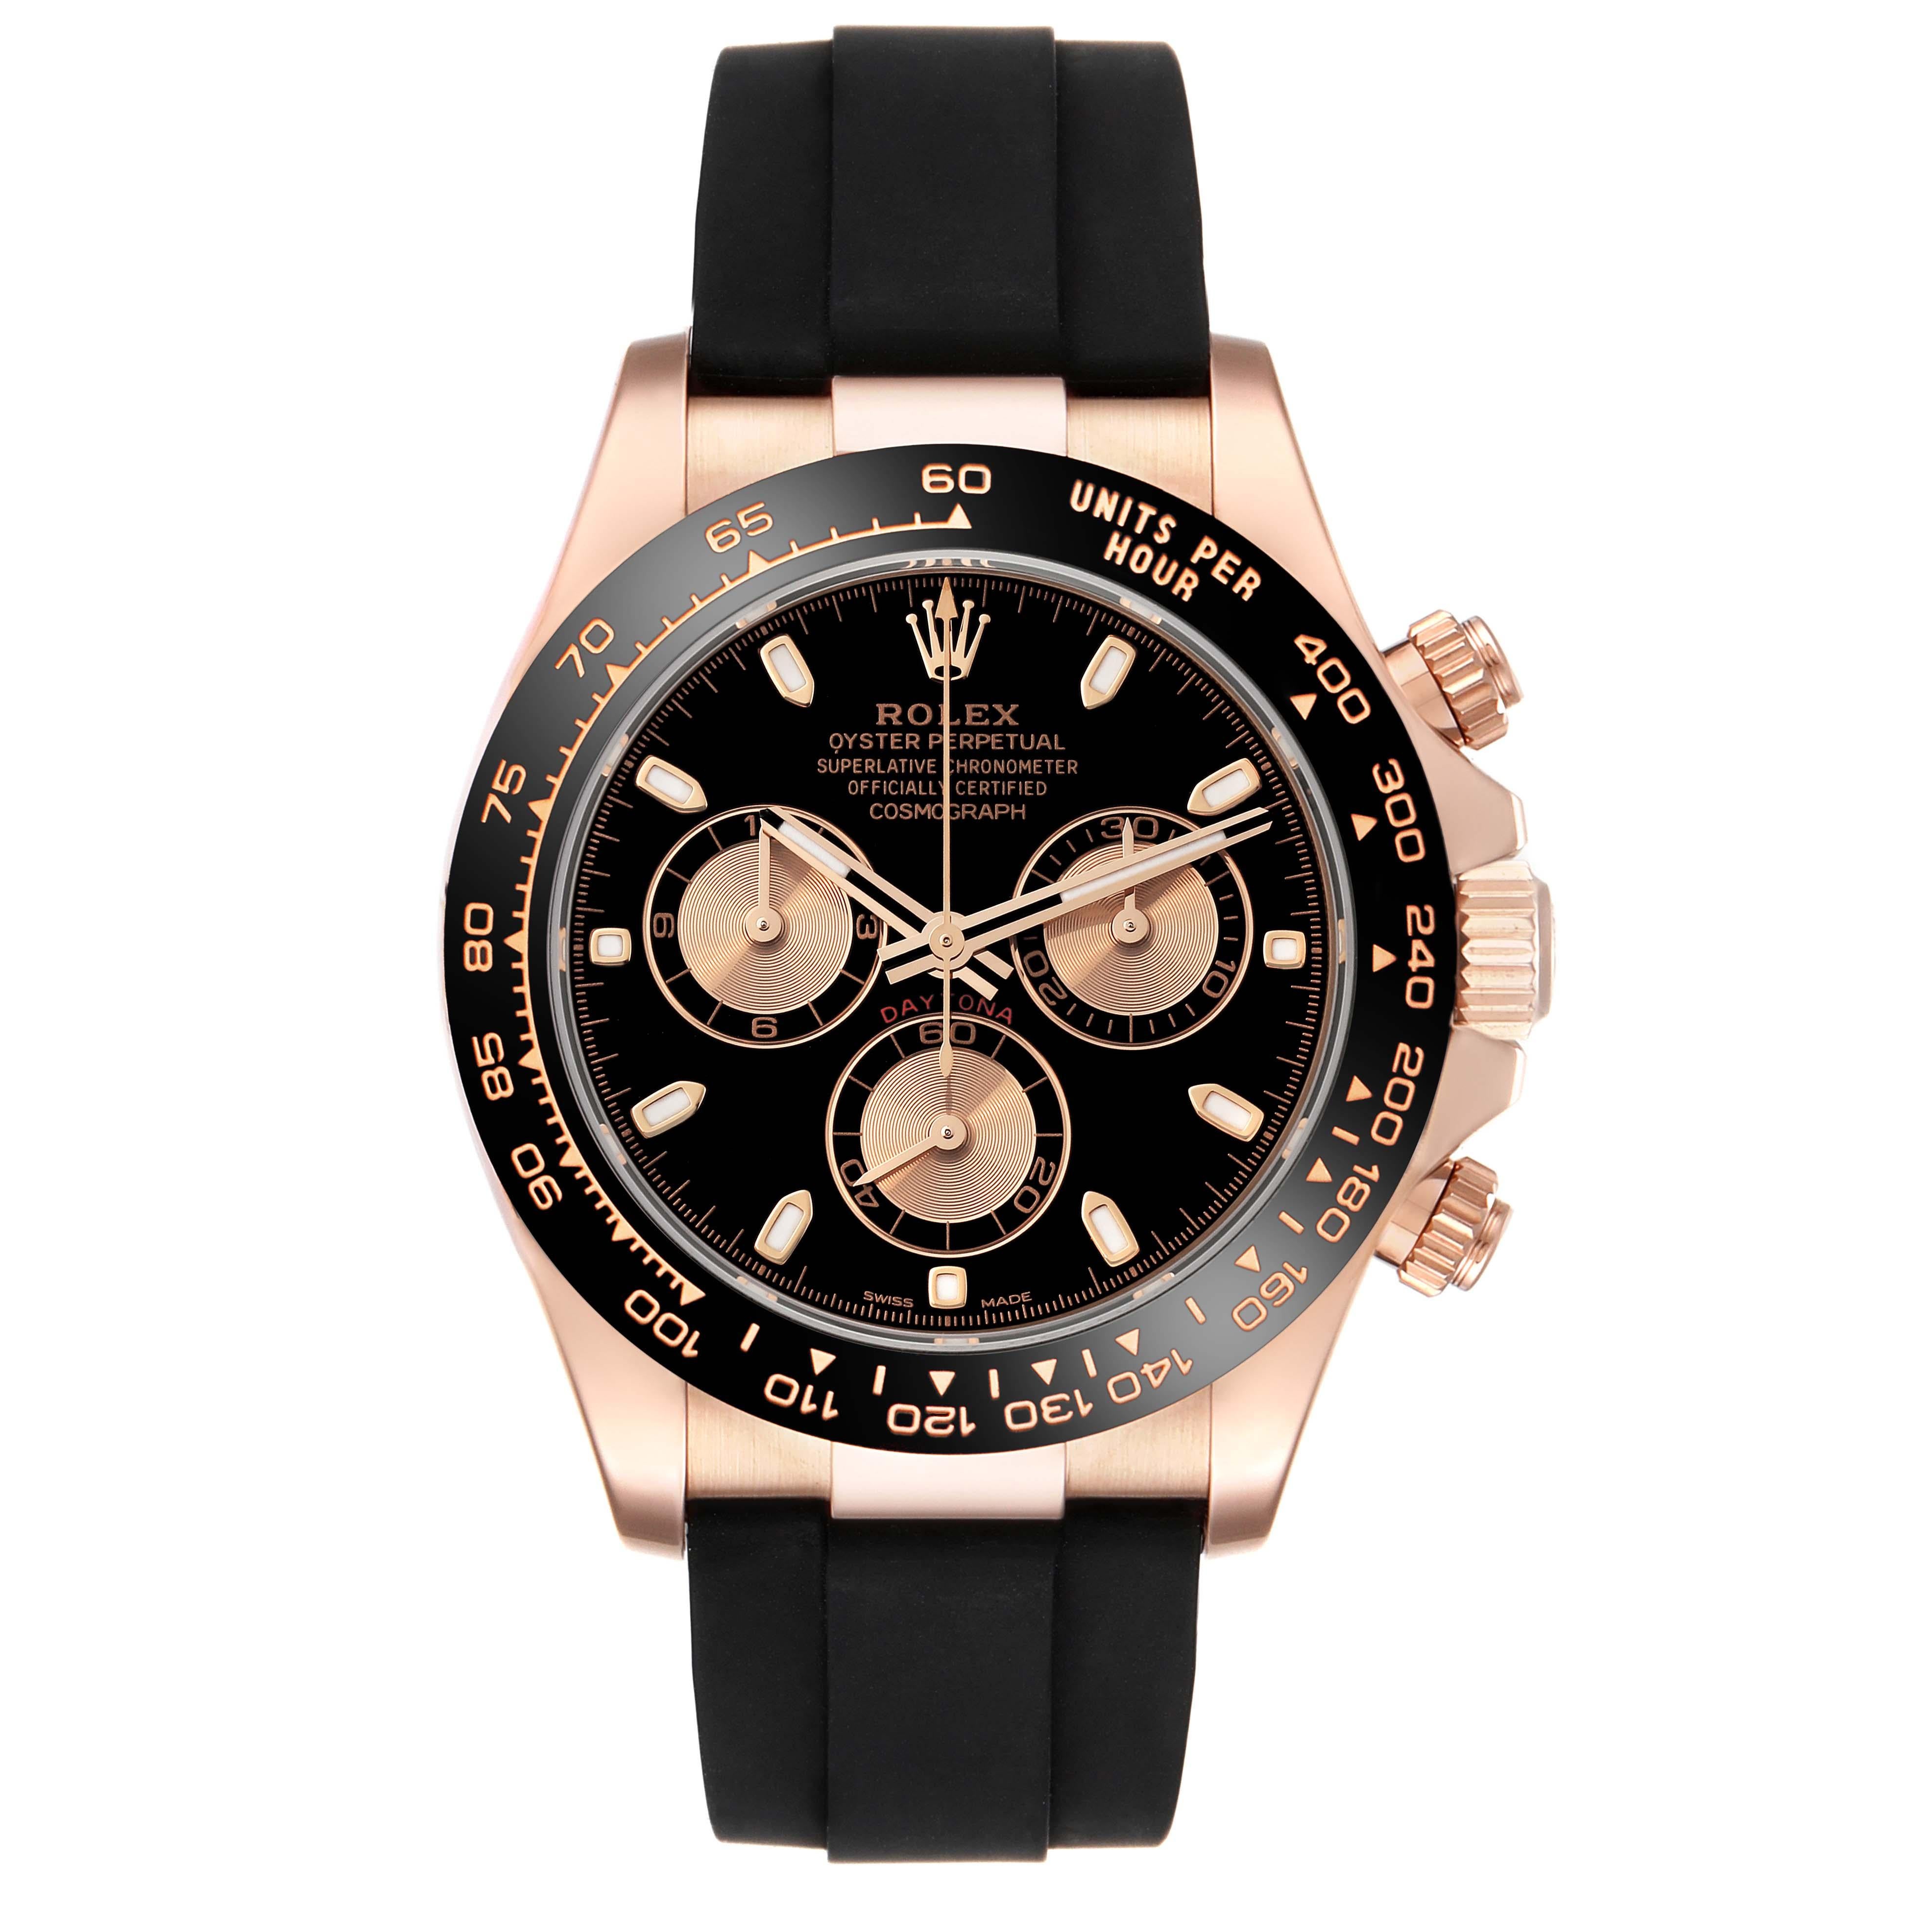 Rolex Cosmograph Daytona Oysterflex Rose Gold Mens Watch 116515 Box Card. Officially certified chronometer automatic self-winding movement. 18K rose gold case 40.0 mm in diameter. Special screw-down push buttons. Screw-down case back. Chronograph